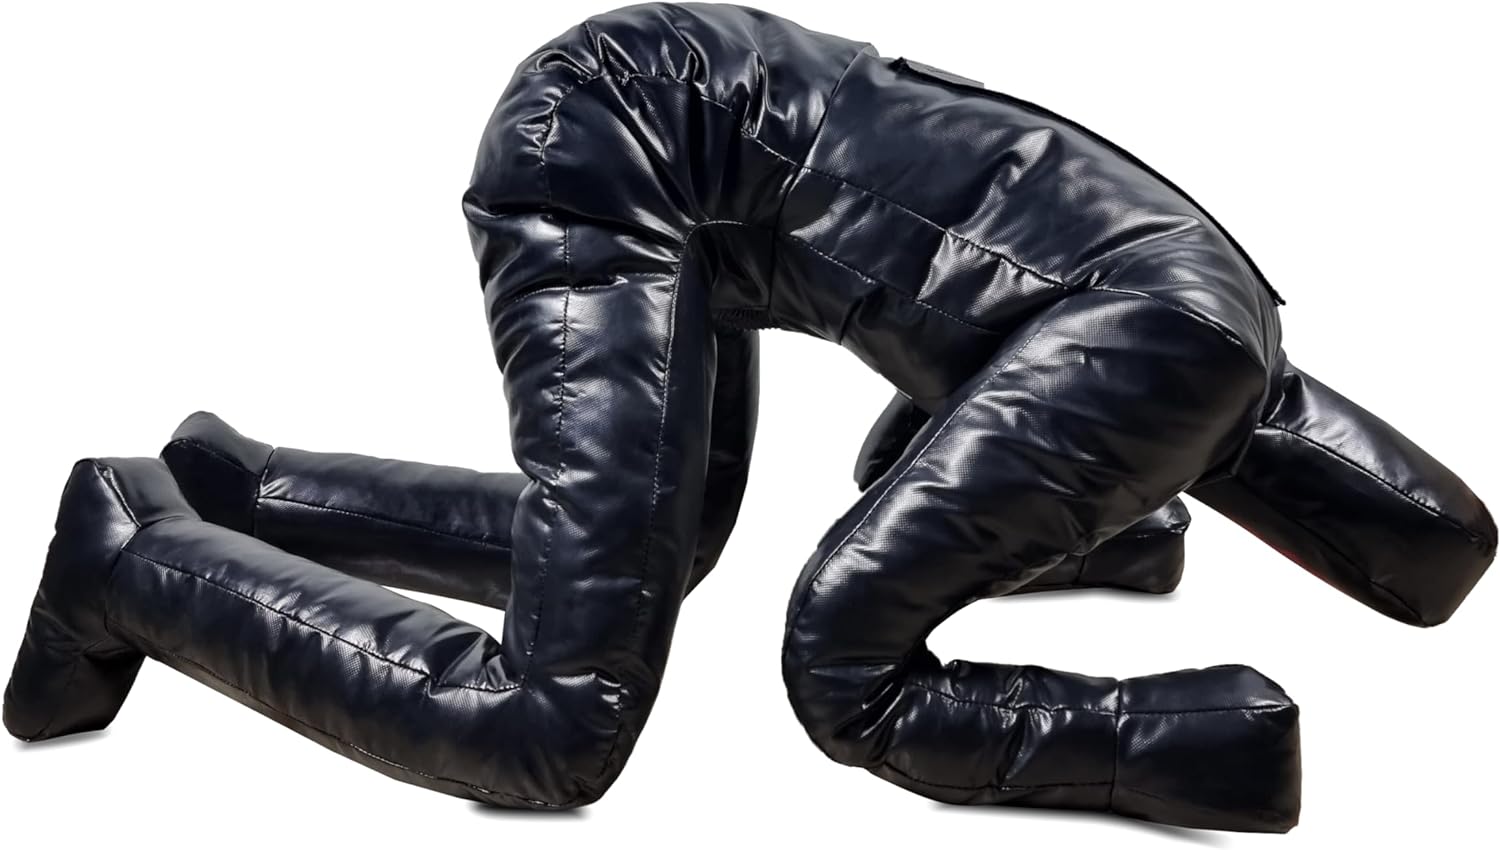 bjj-grappling-dummy-judo-punching-bag-black-and-red